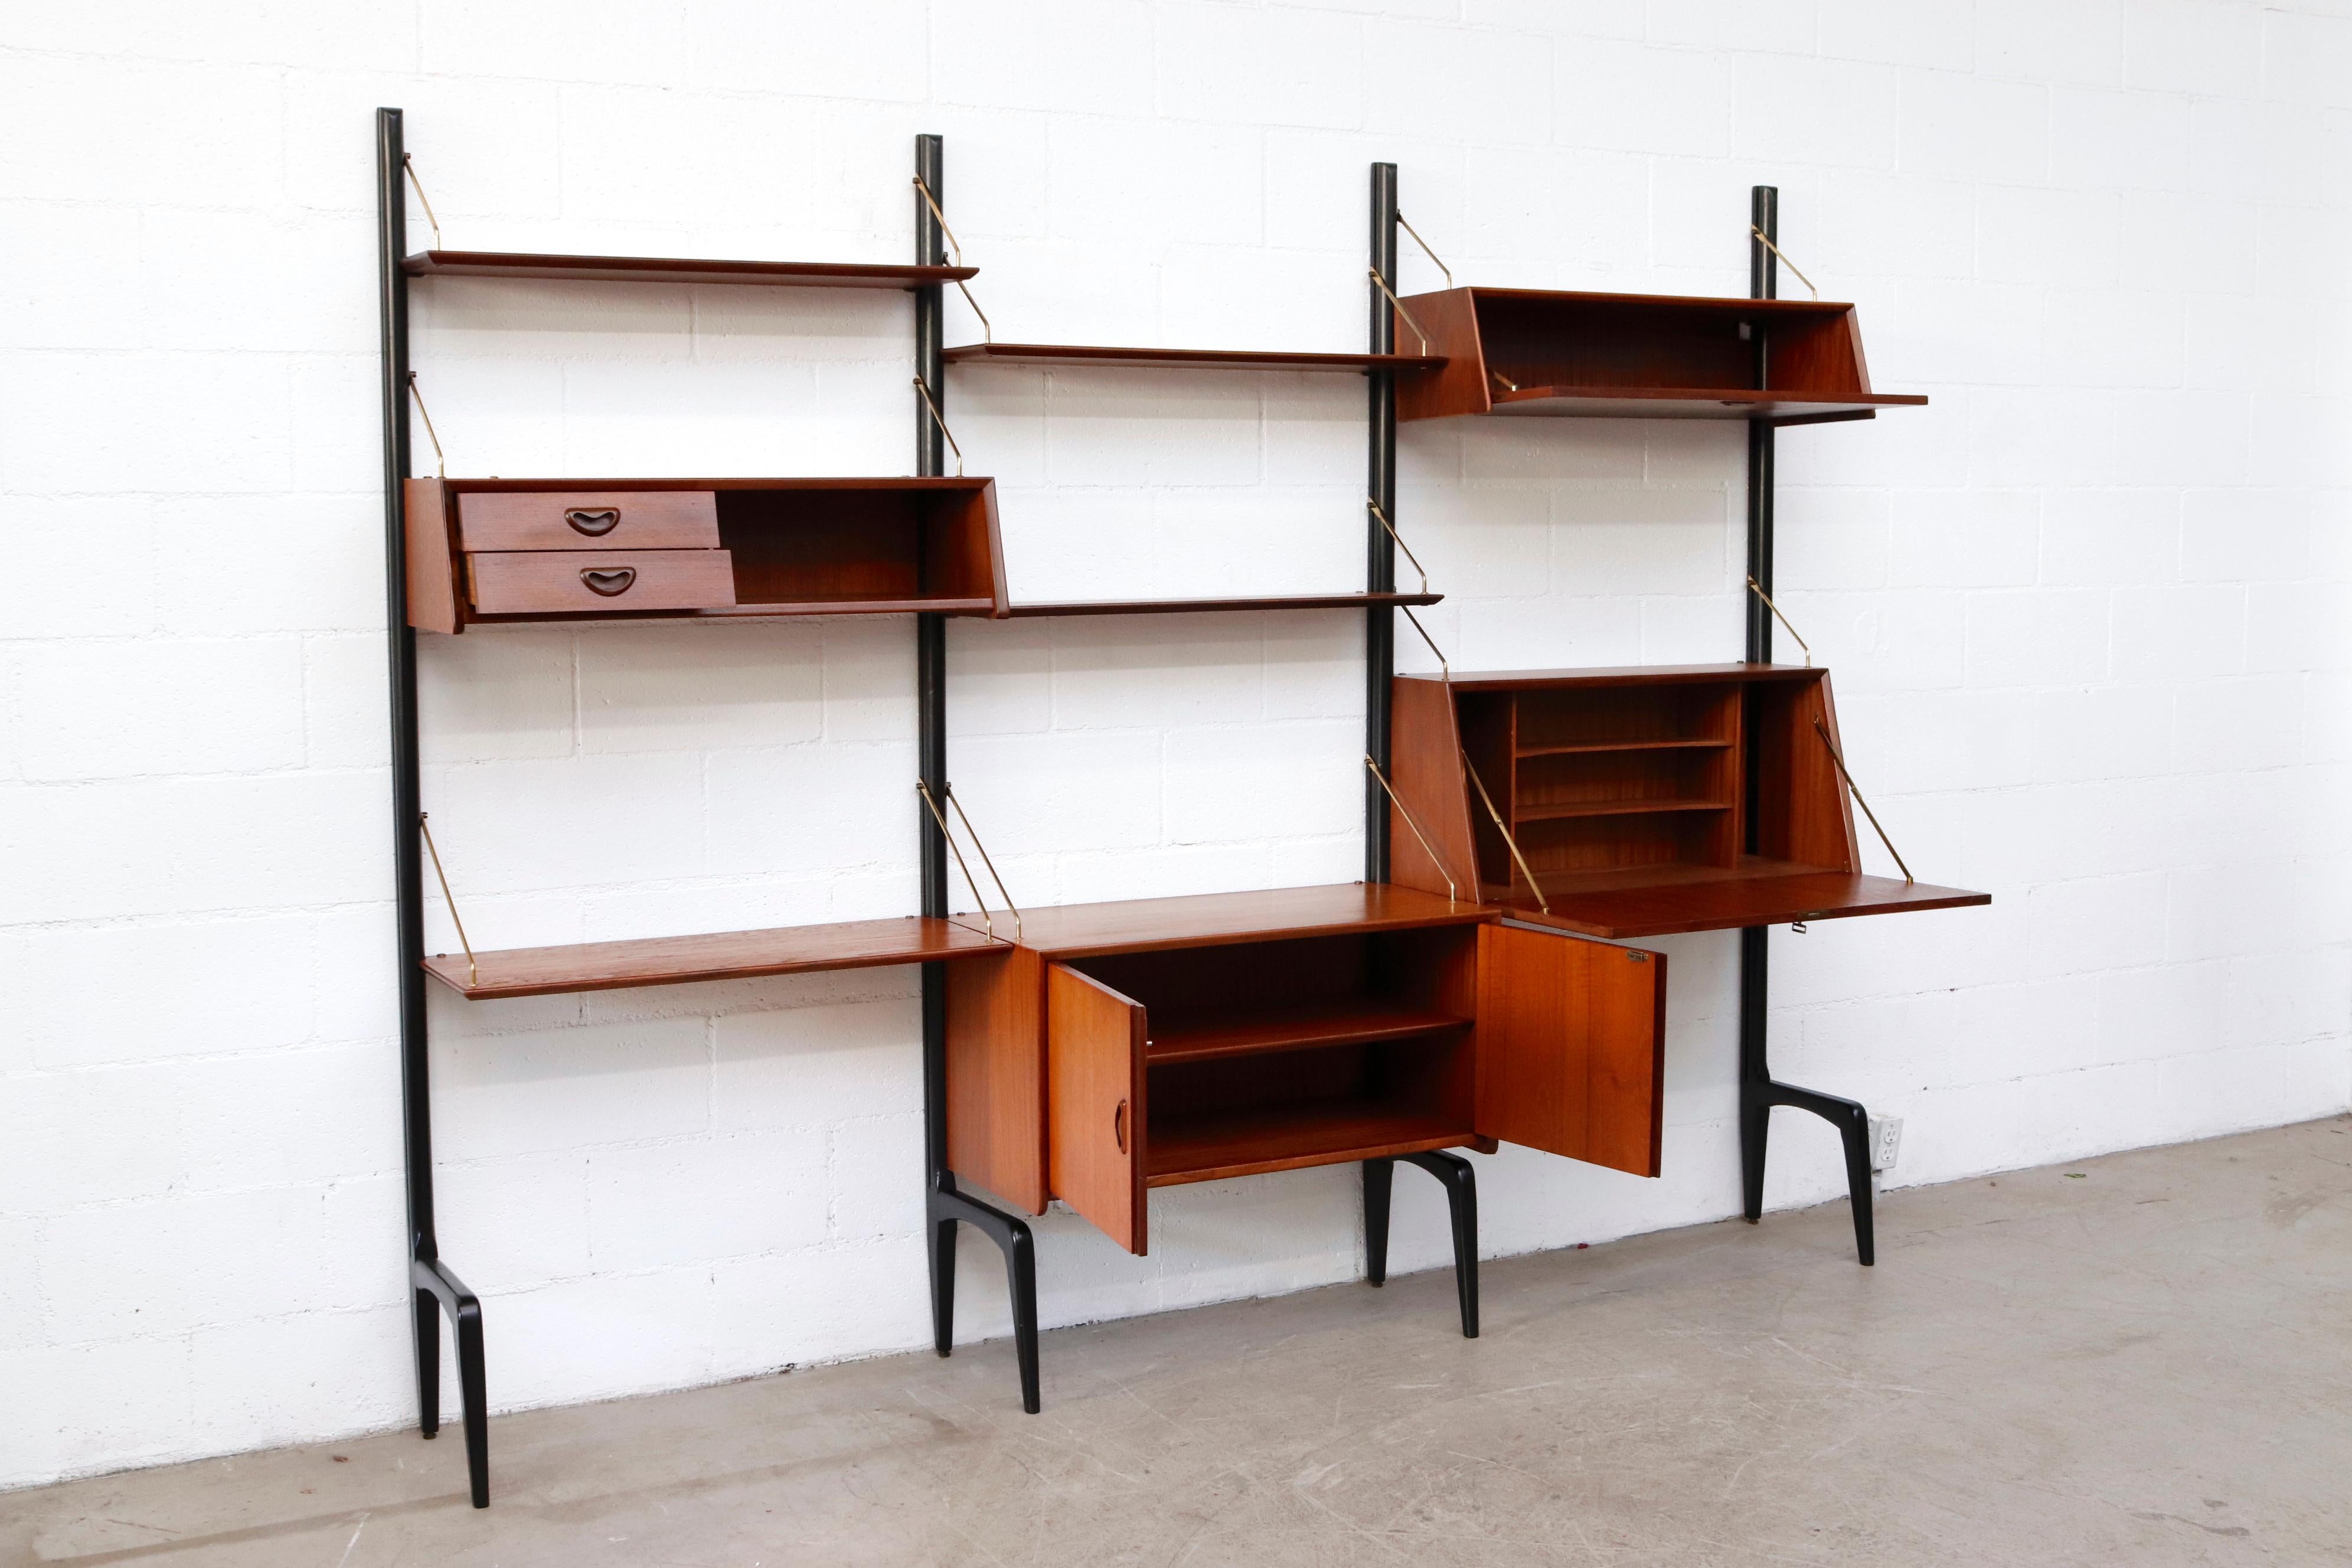 Handsome Louis Van Teeffelen 3 section standing wall unit for WeBe. Lightly refinished teak shelving and storage cabinets with drop down desk. in good overall condition with visible patina including a small burn mark on one cabinet, and brass